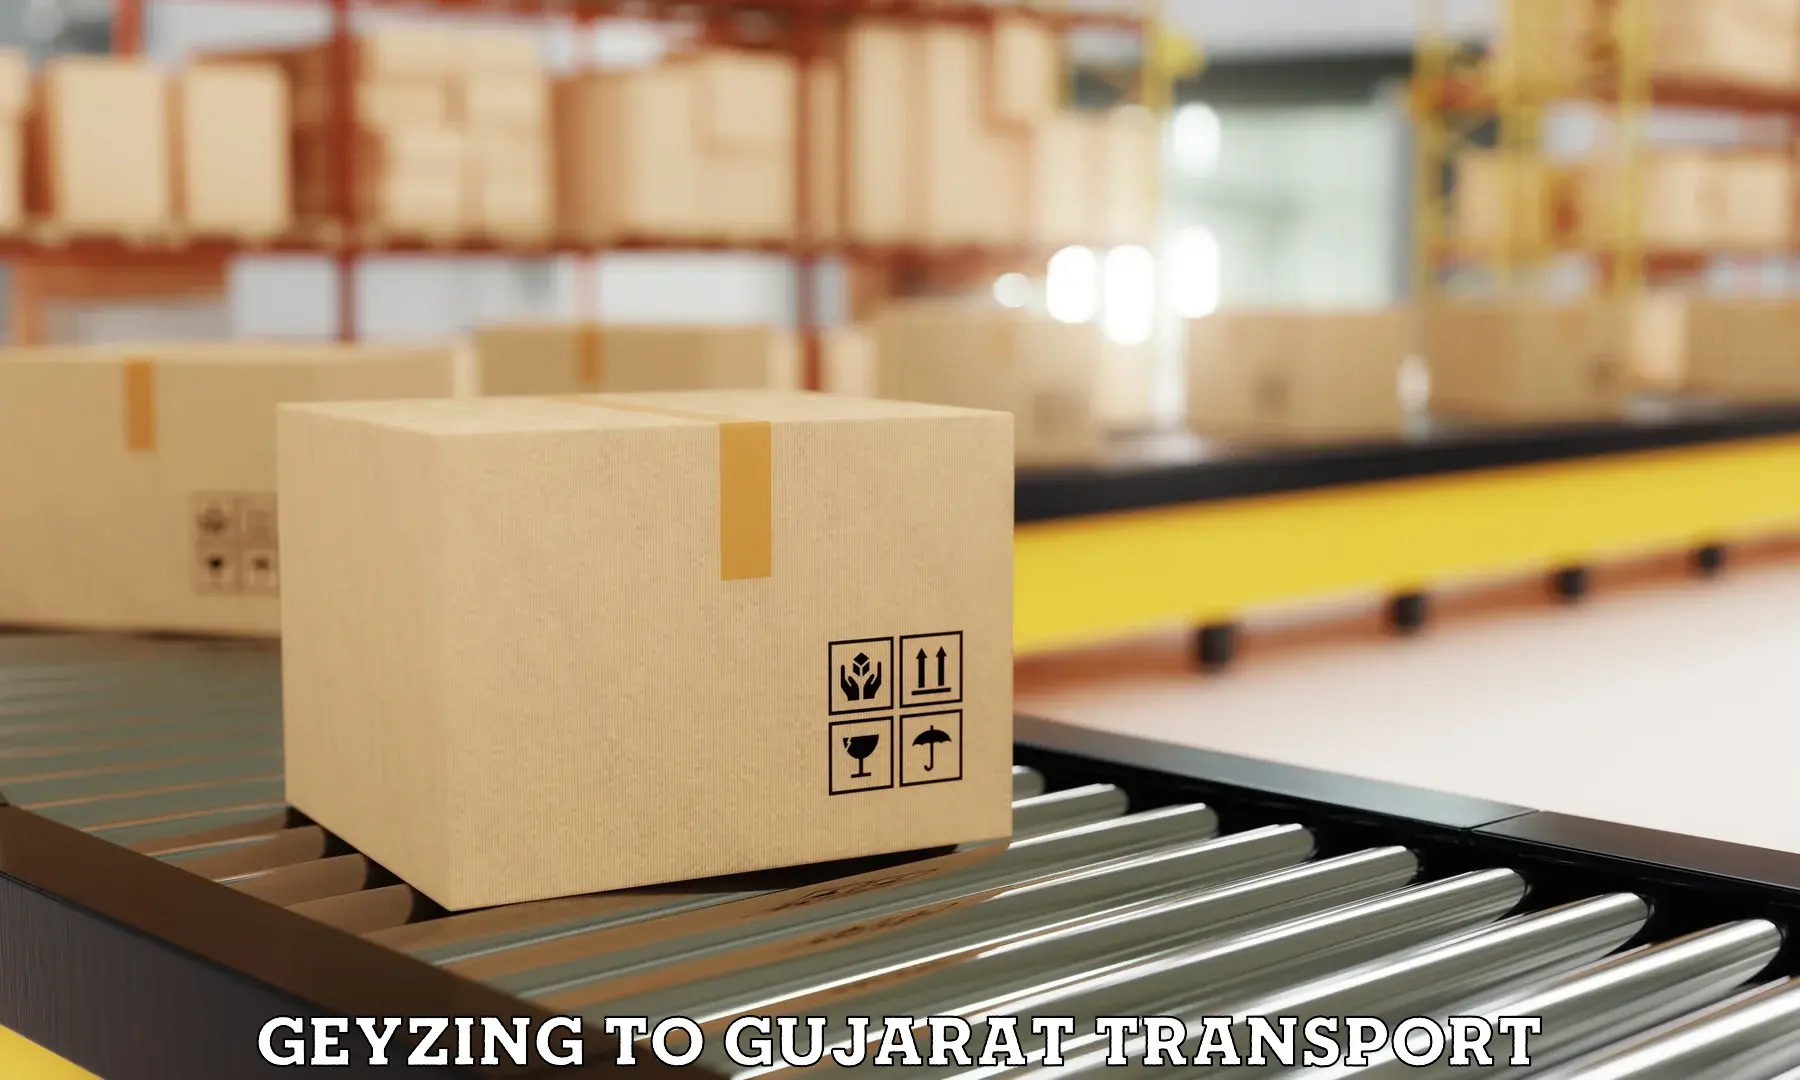 Daily parcel service transport Geyzing to Gujarat